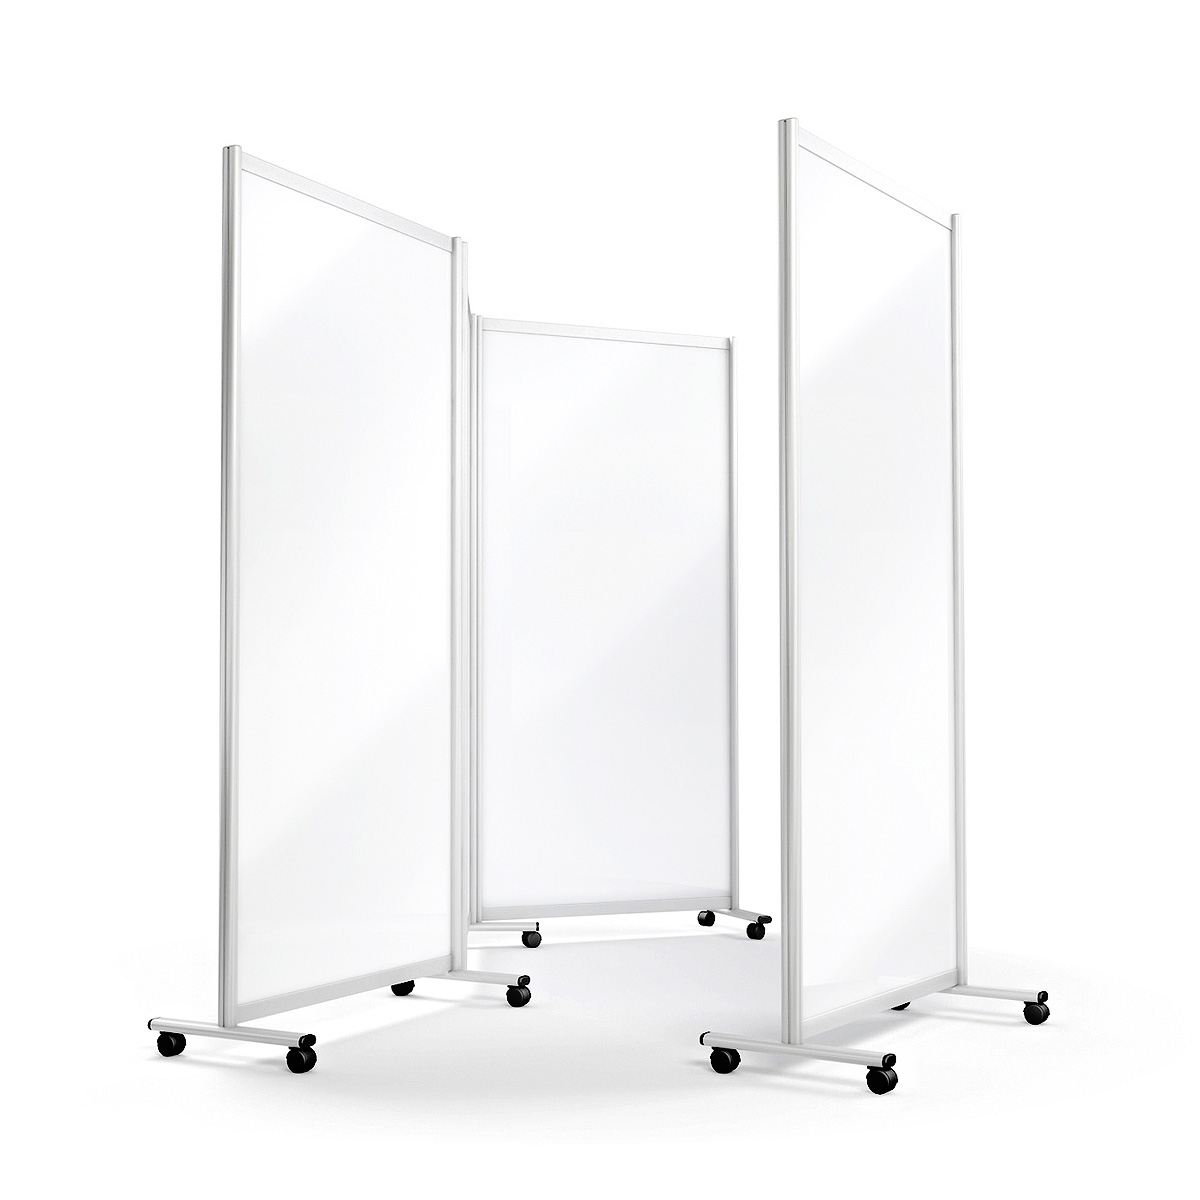 Privacy Room Divider Screens on Wheels